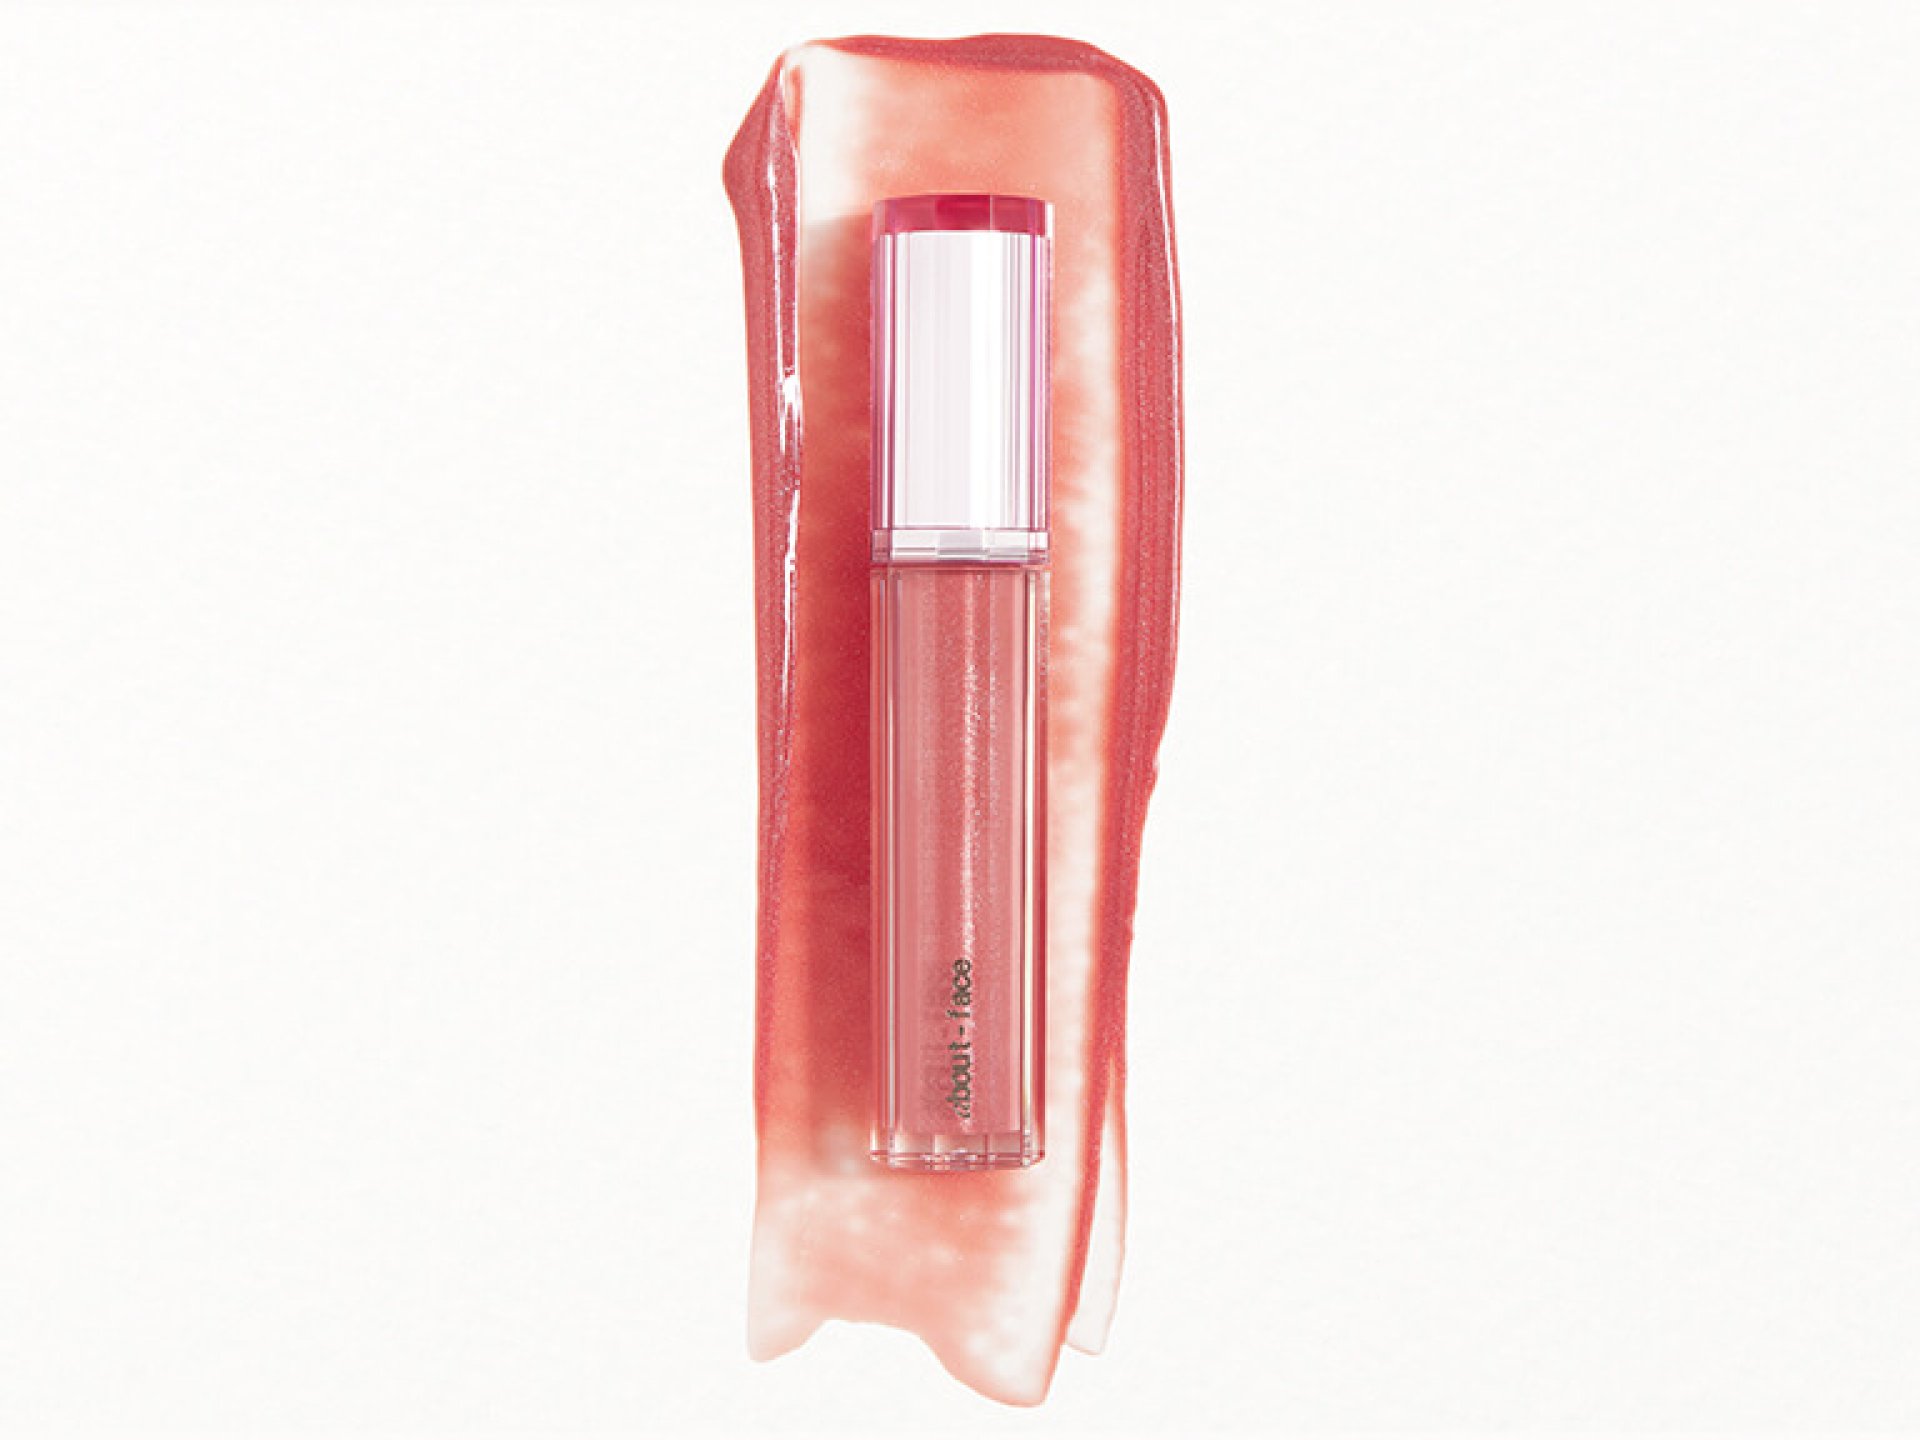 ABOUT-FACE Light Lock Lip Gloss in ANGEL ON FIRE